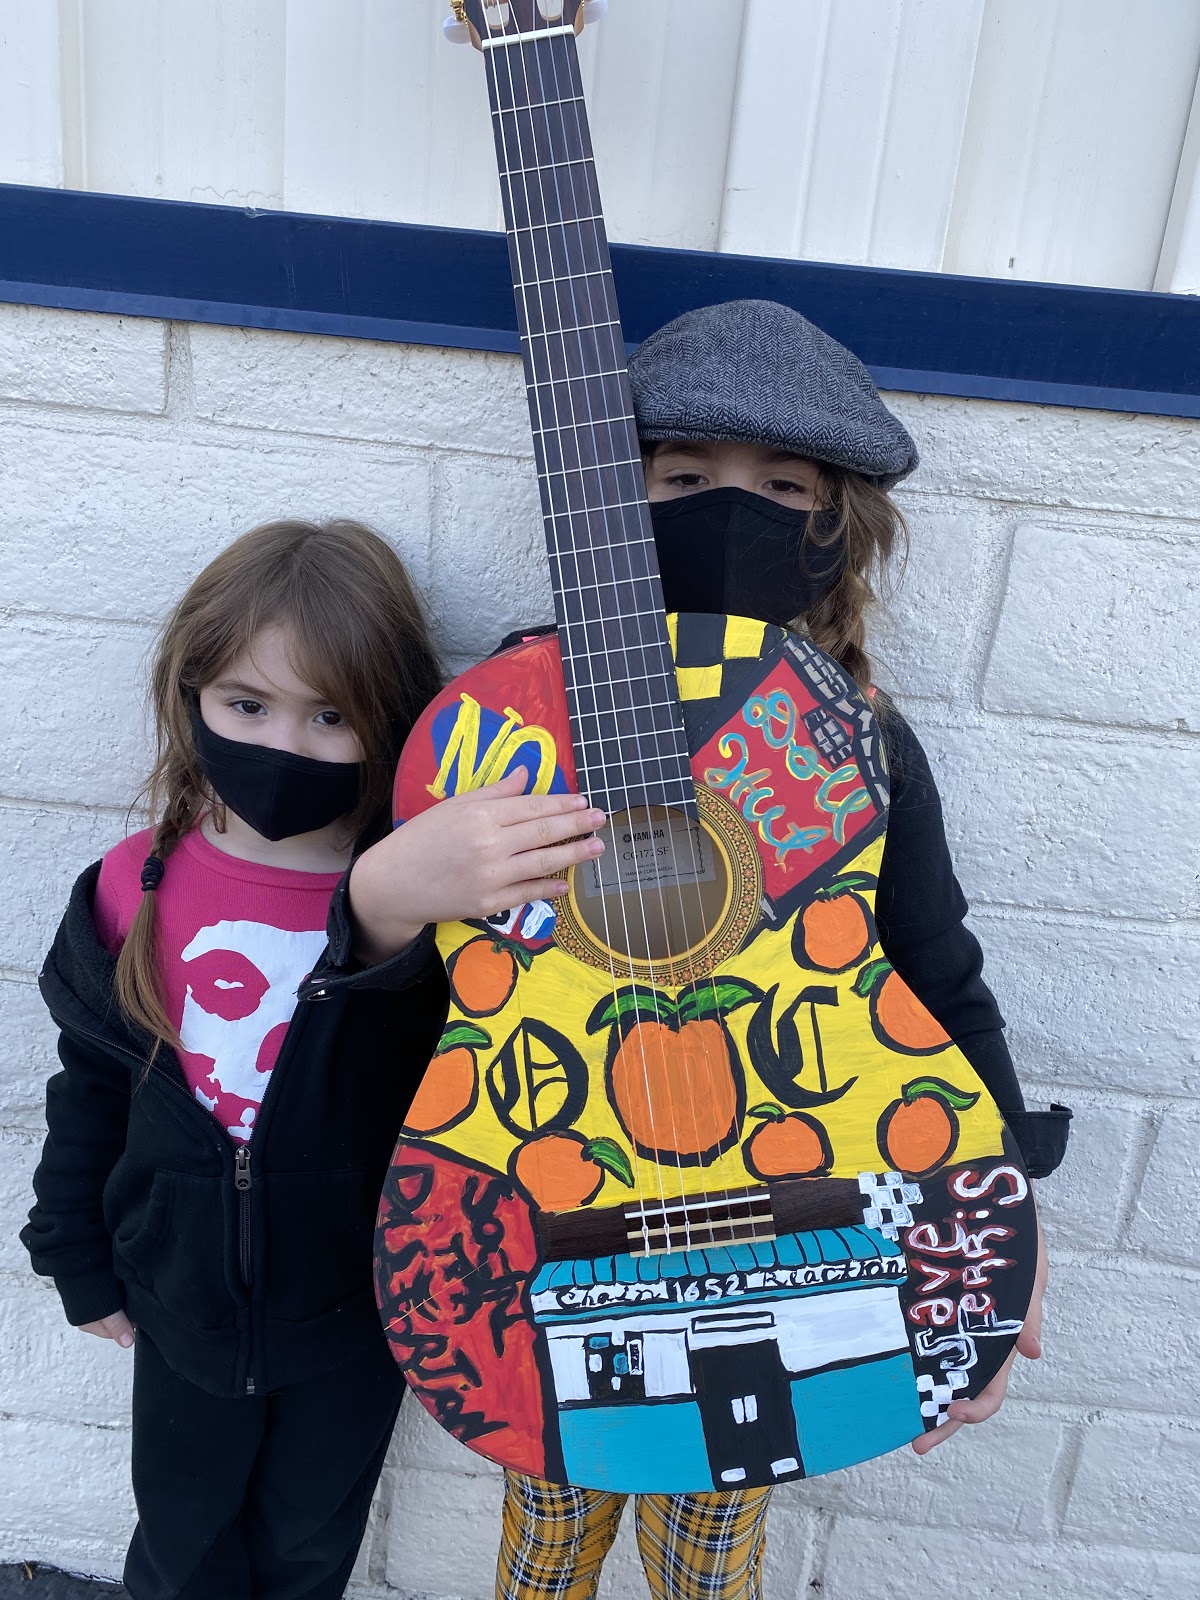 Children with painted guitar